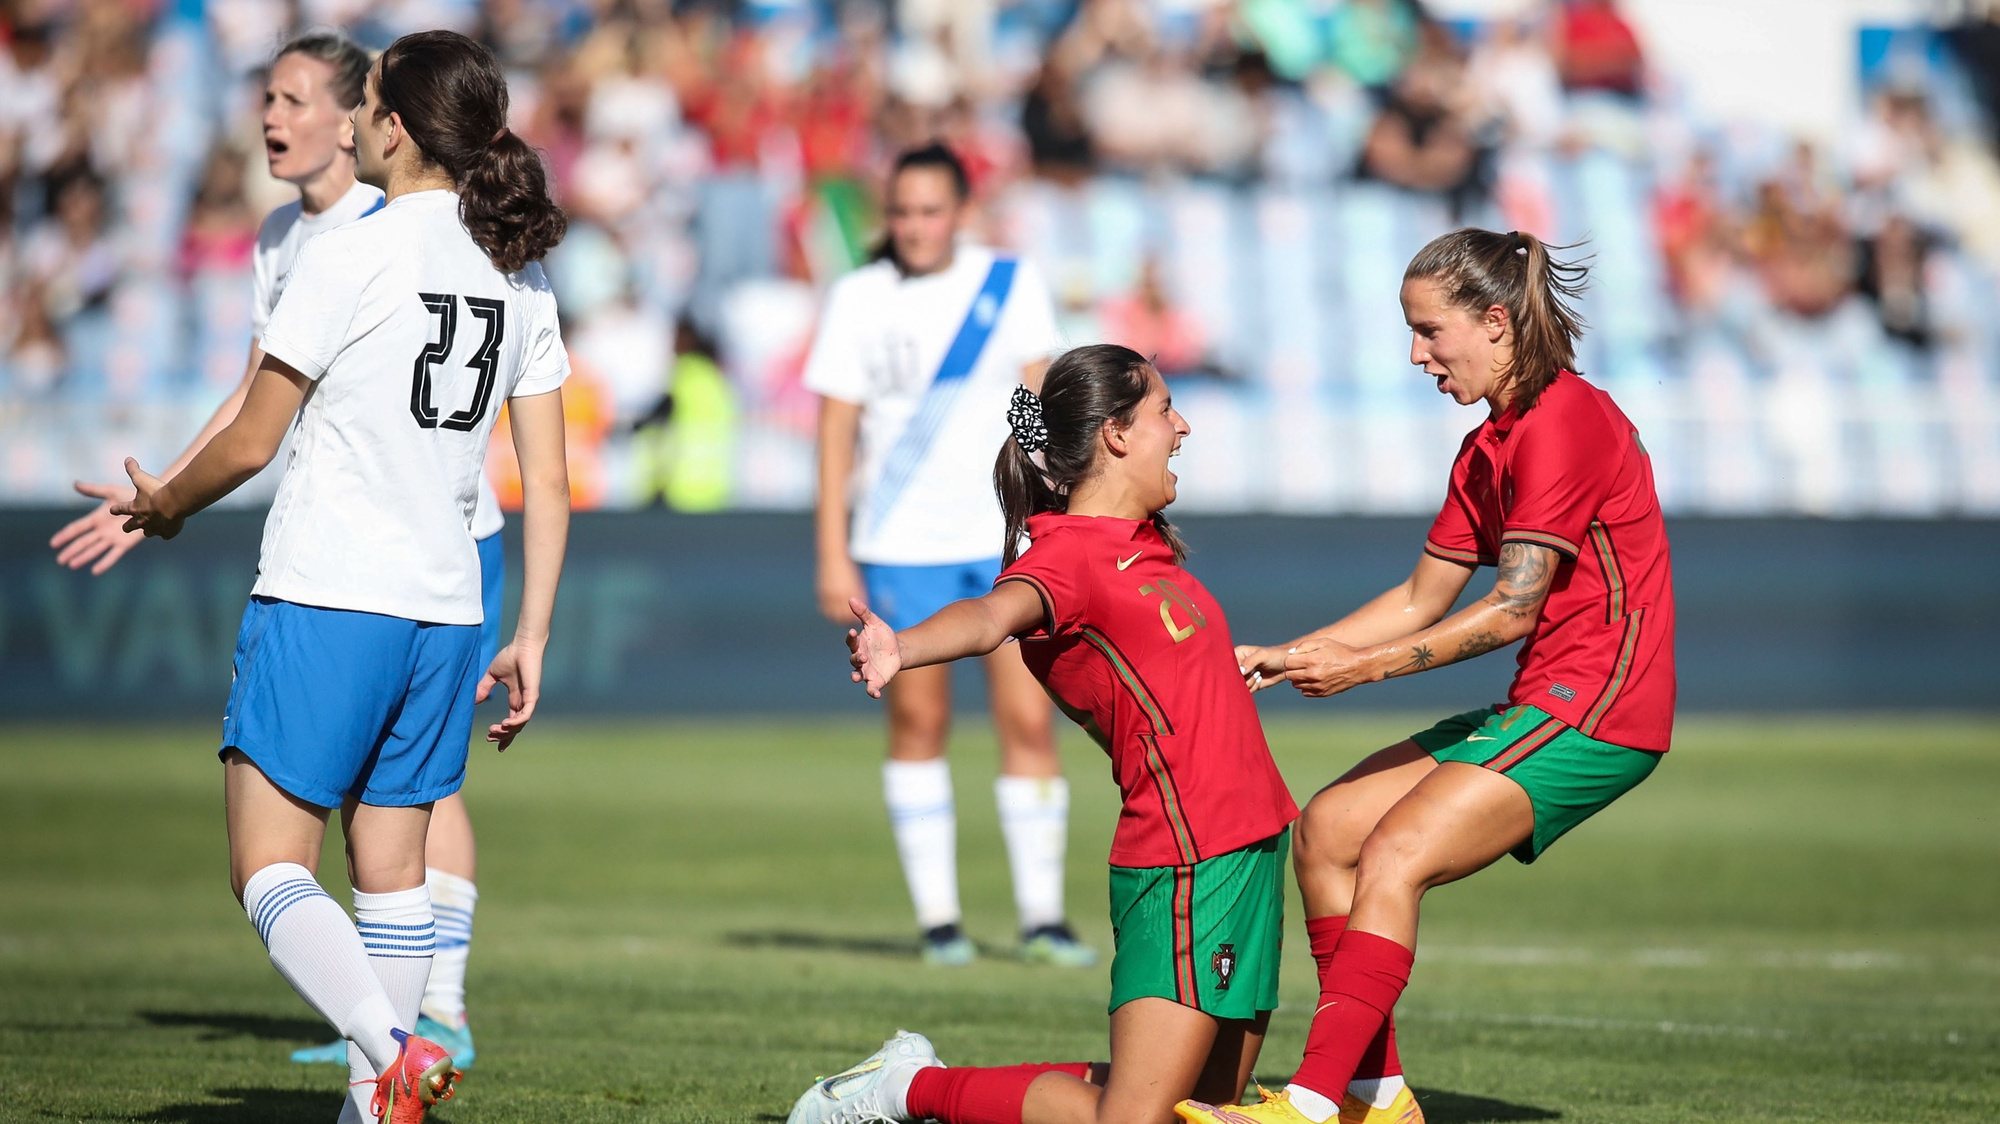 Portugal&#039;s Francisca Nazareth celebrates after scoring a goal against Greece during the 2022 Women&#039;s Soccer European Championships Qualification match, held in Lisbon, Portugal, 22 June 2022. ANTONIO COTRIM/LUSA